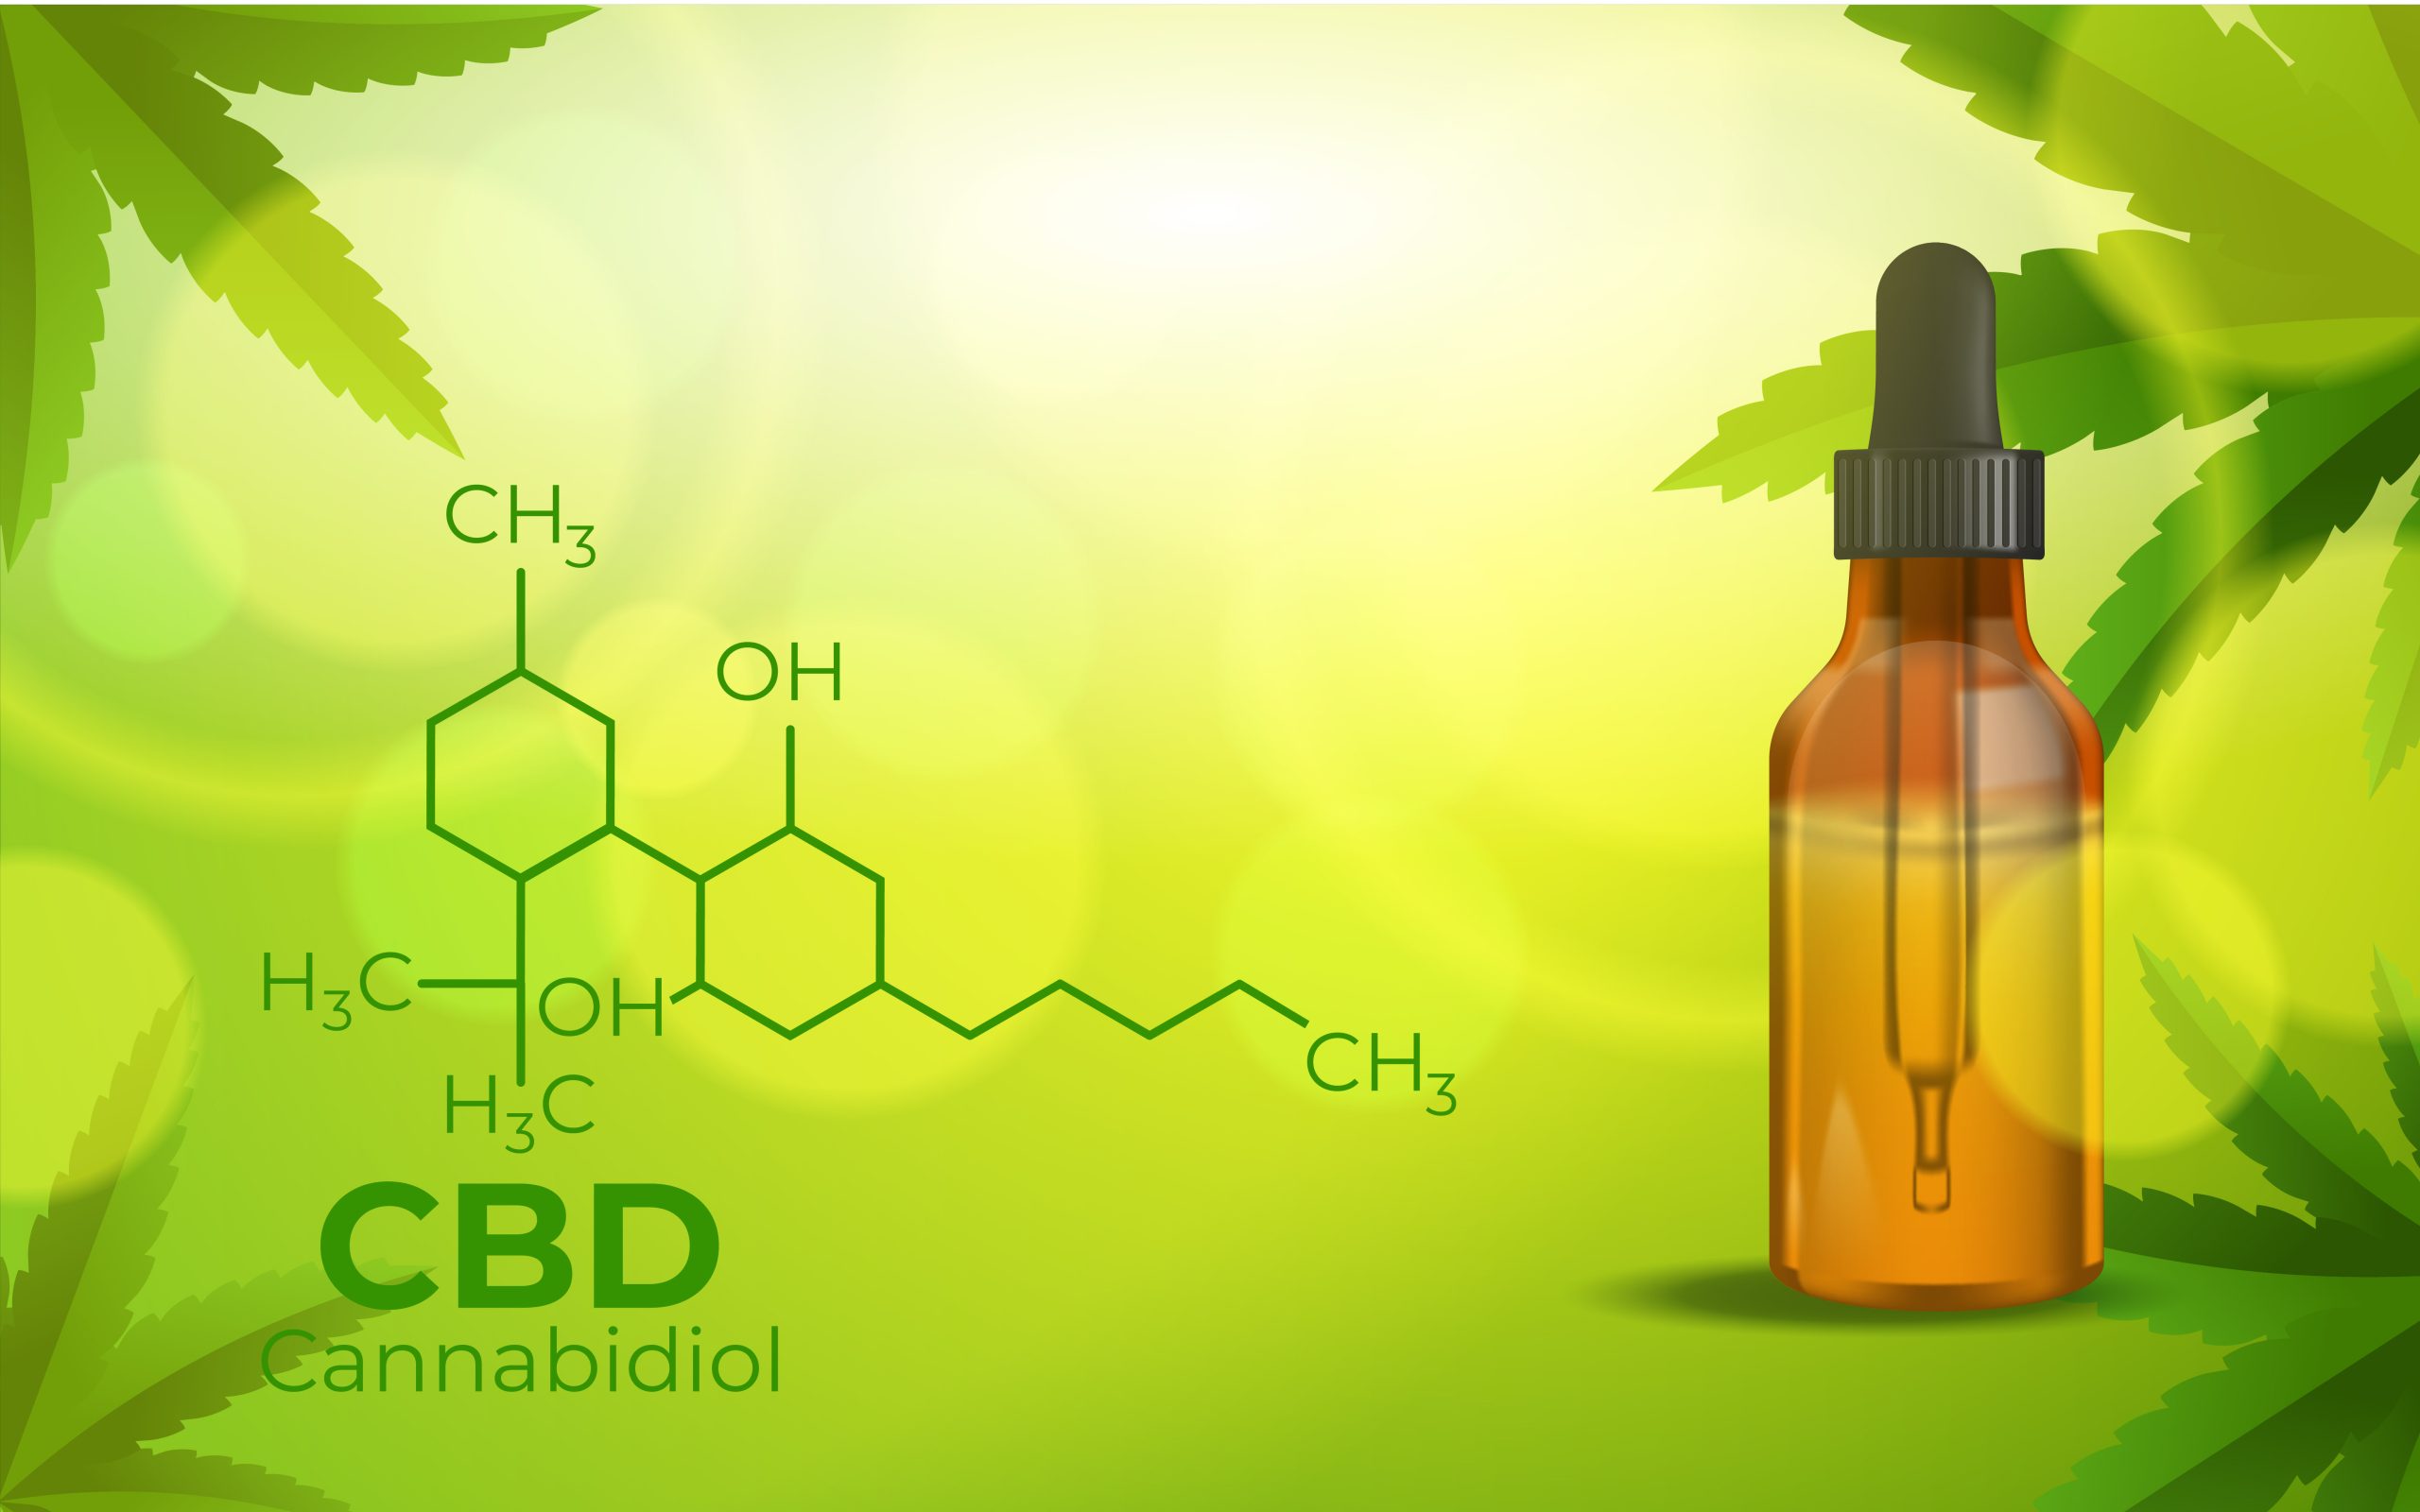 How Long Does CBD Stay In Your System